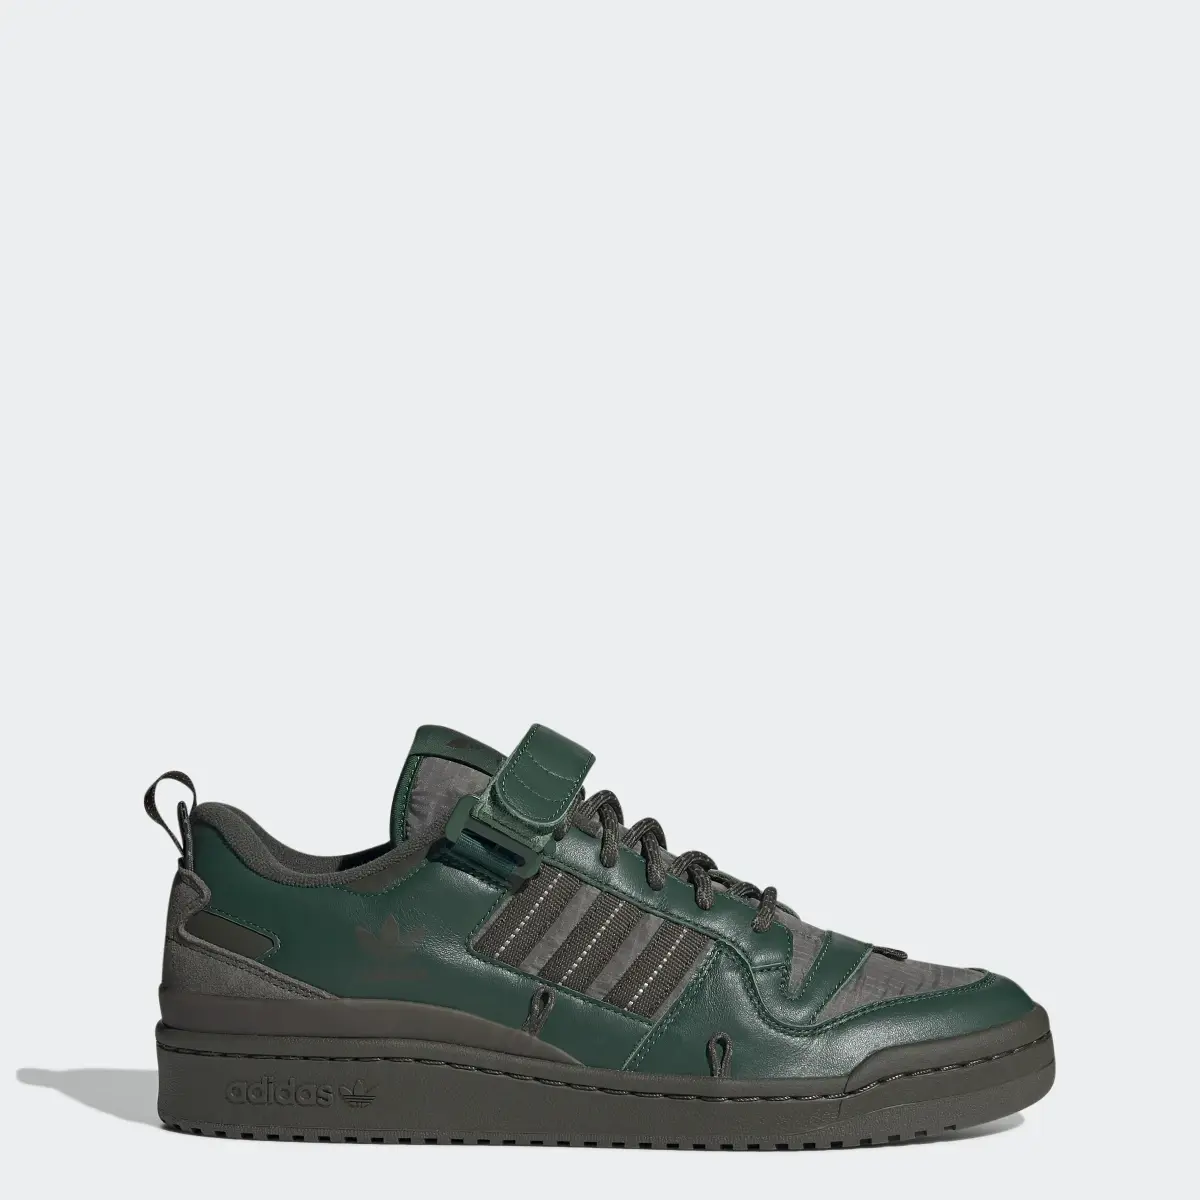 Adidas Forum 84 Camp Low Shoes. 1